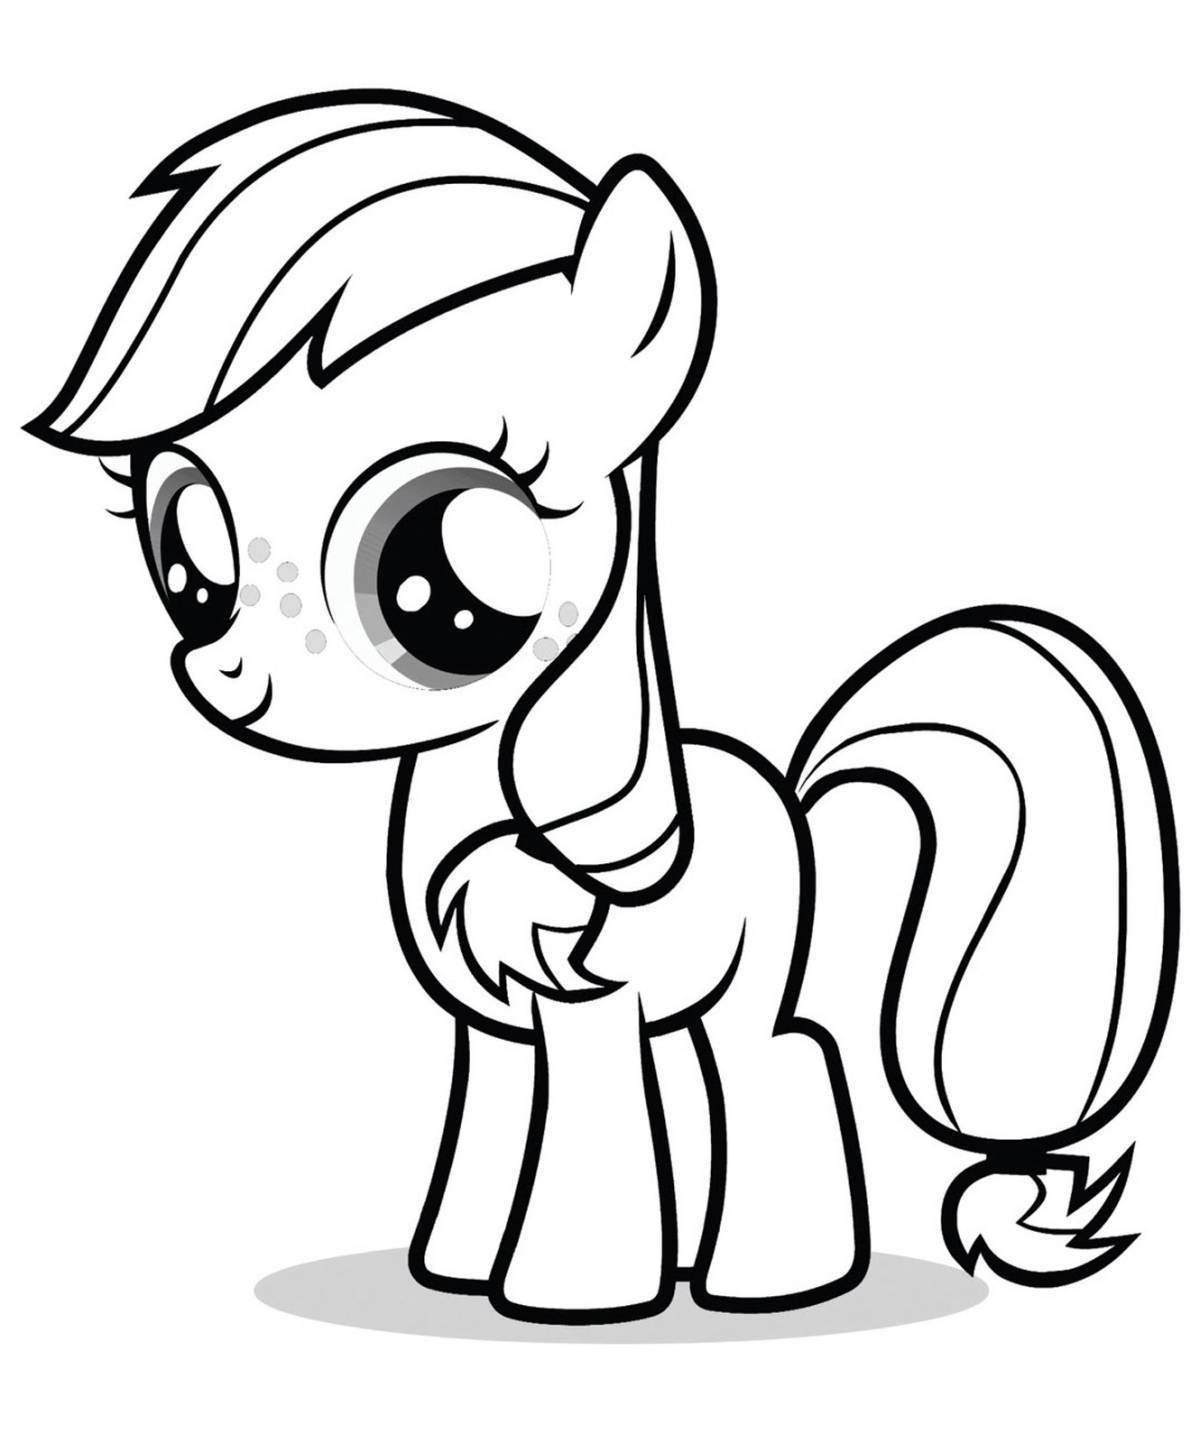 Outstanding pony coloring page for kids